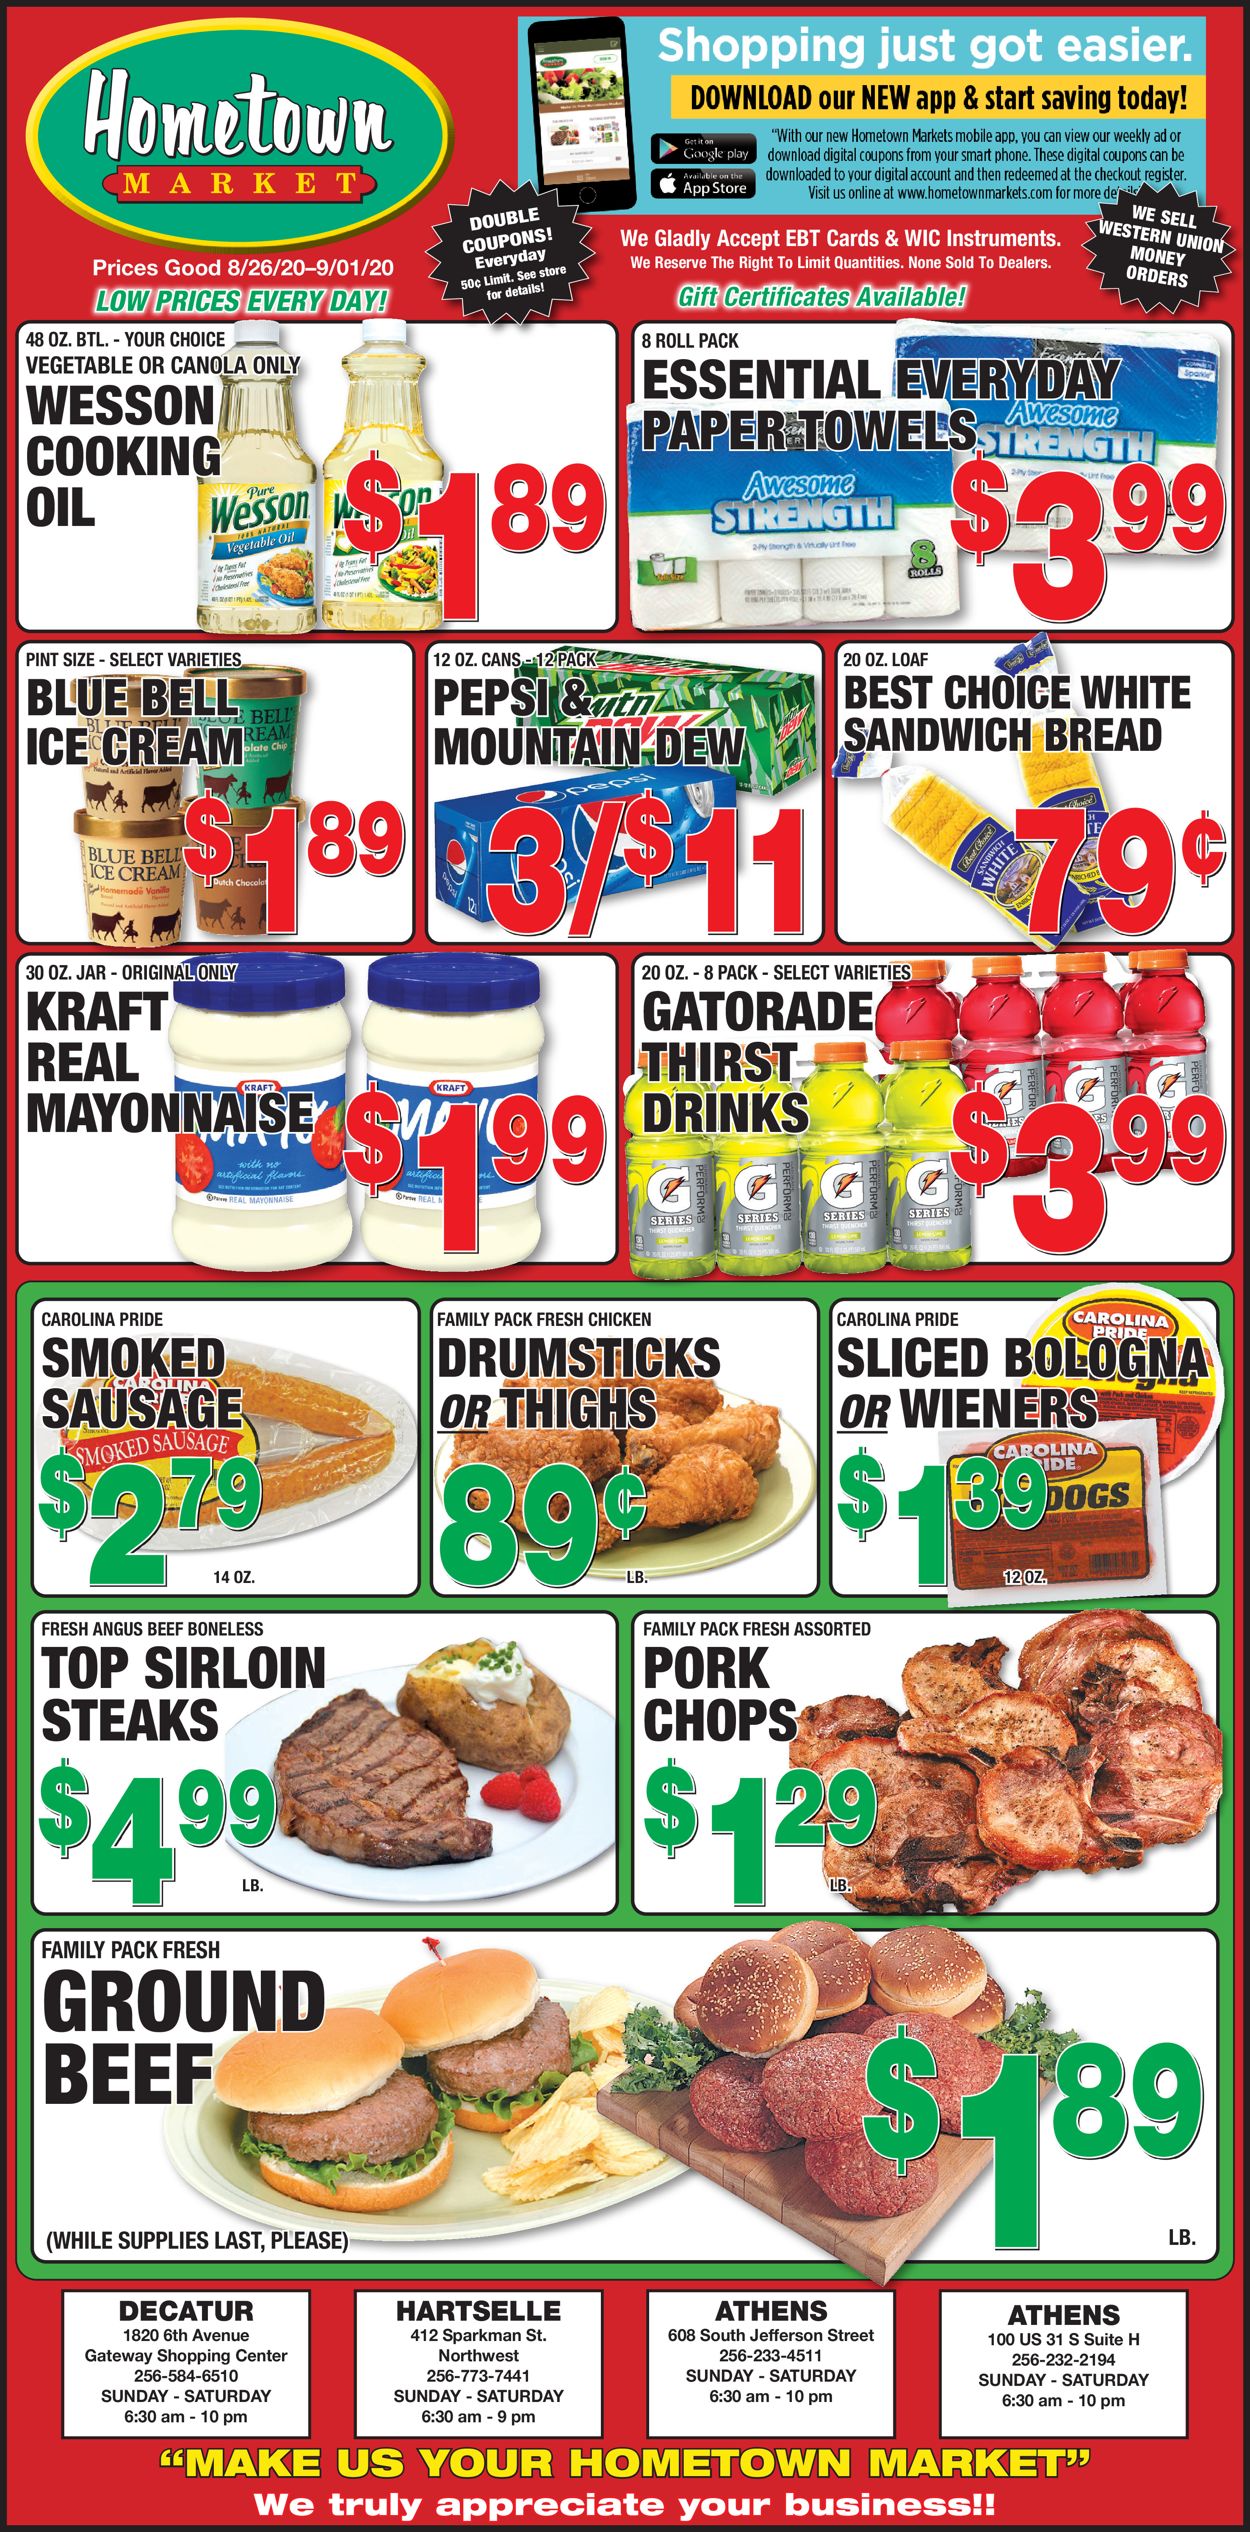 Hometown Market Current weekly ad 08/26 - 09/01/2020 - frequent-ads.com